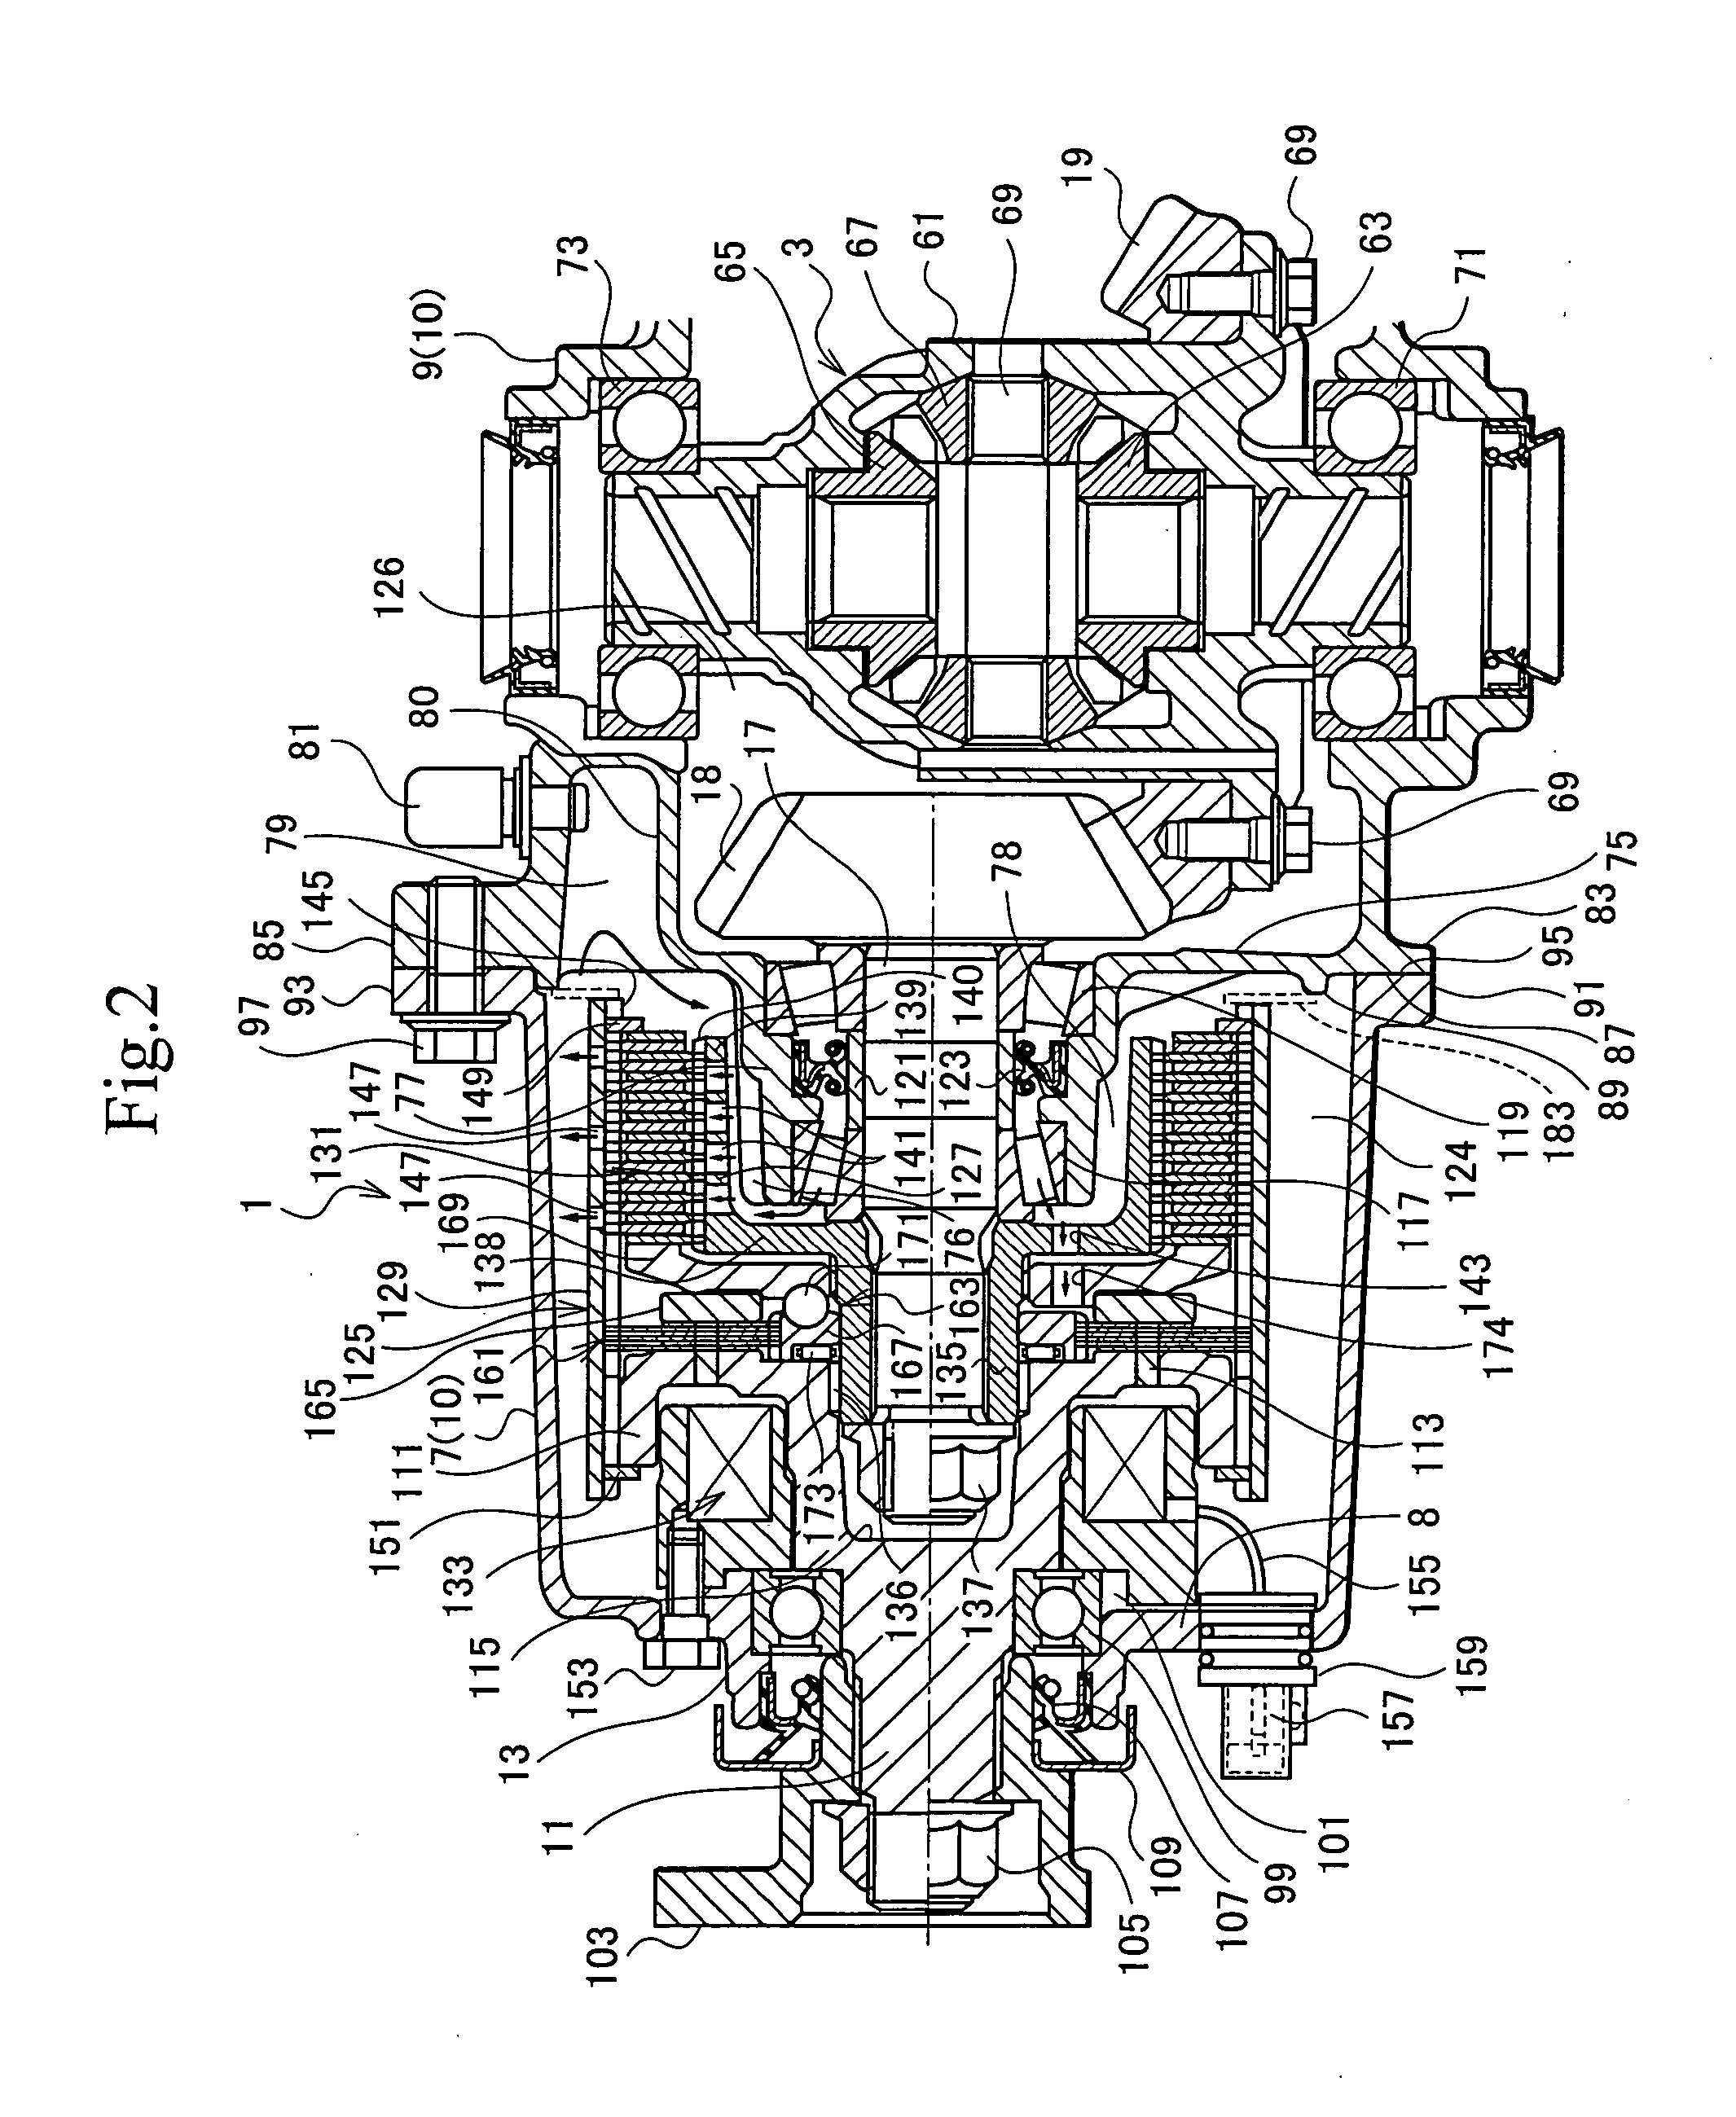 Torque transmission apparatus and case structure